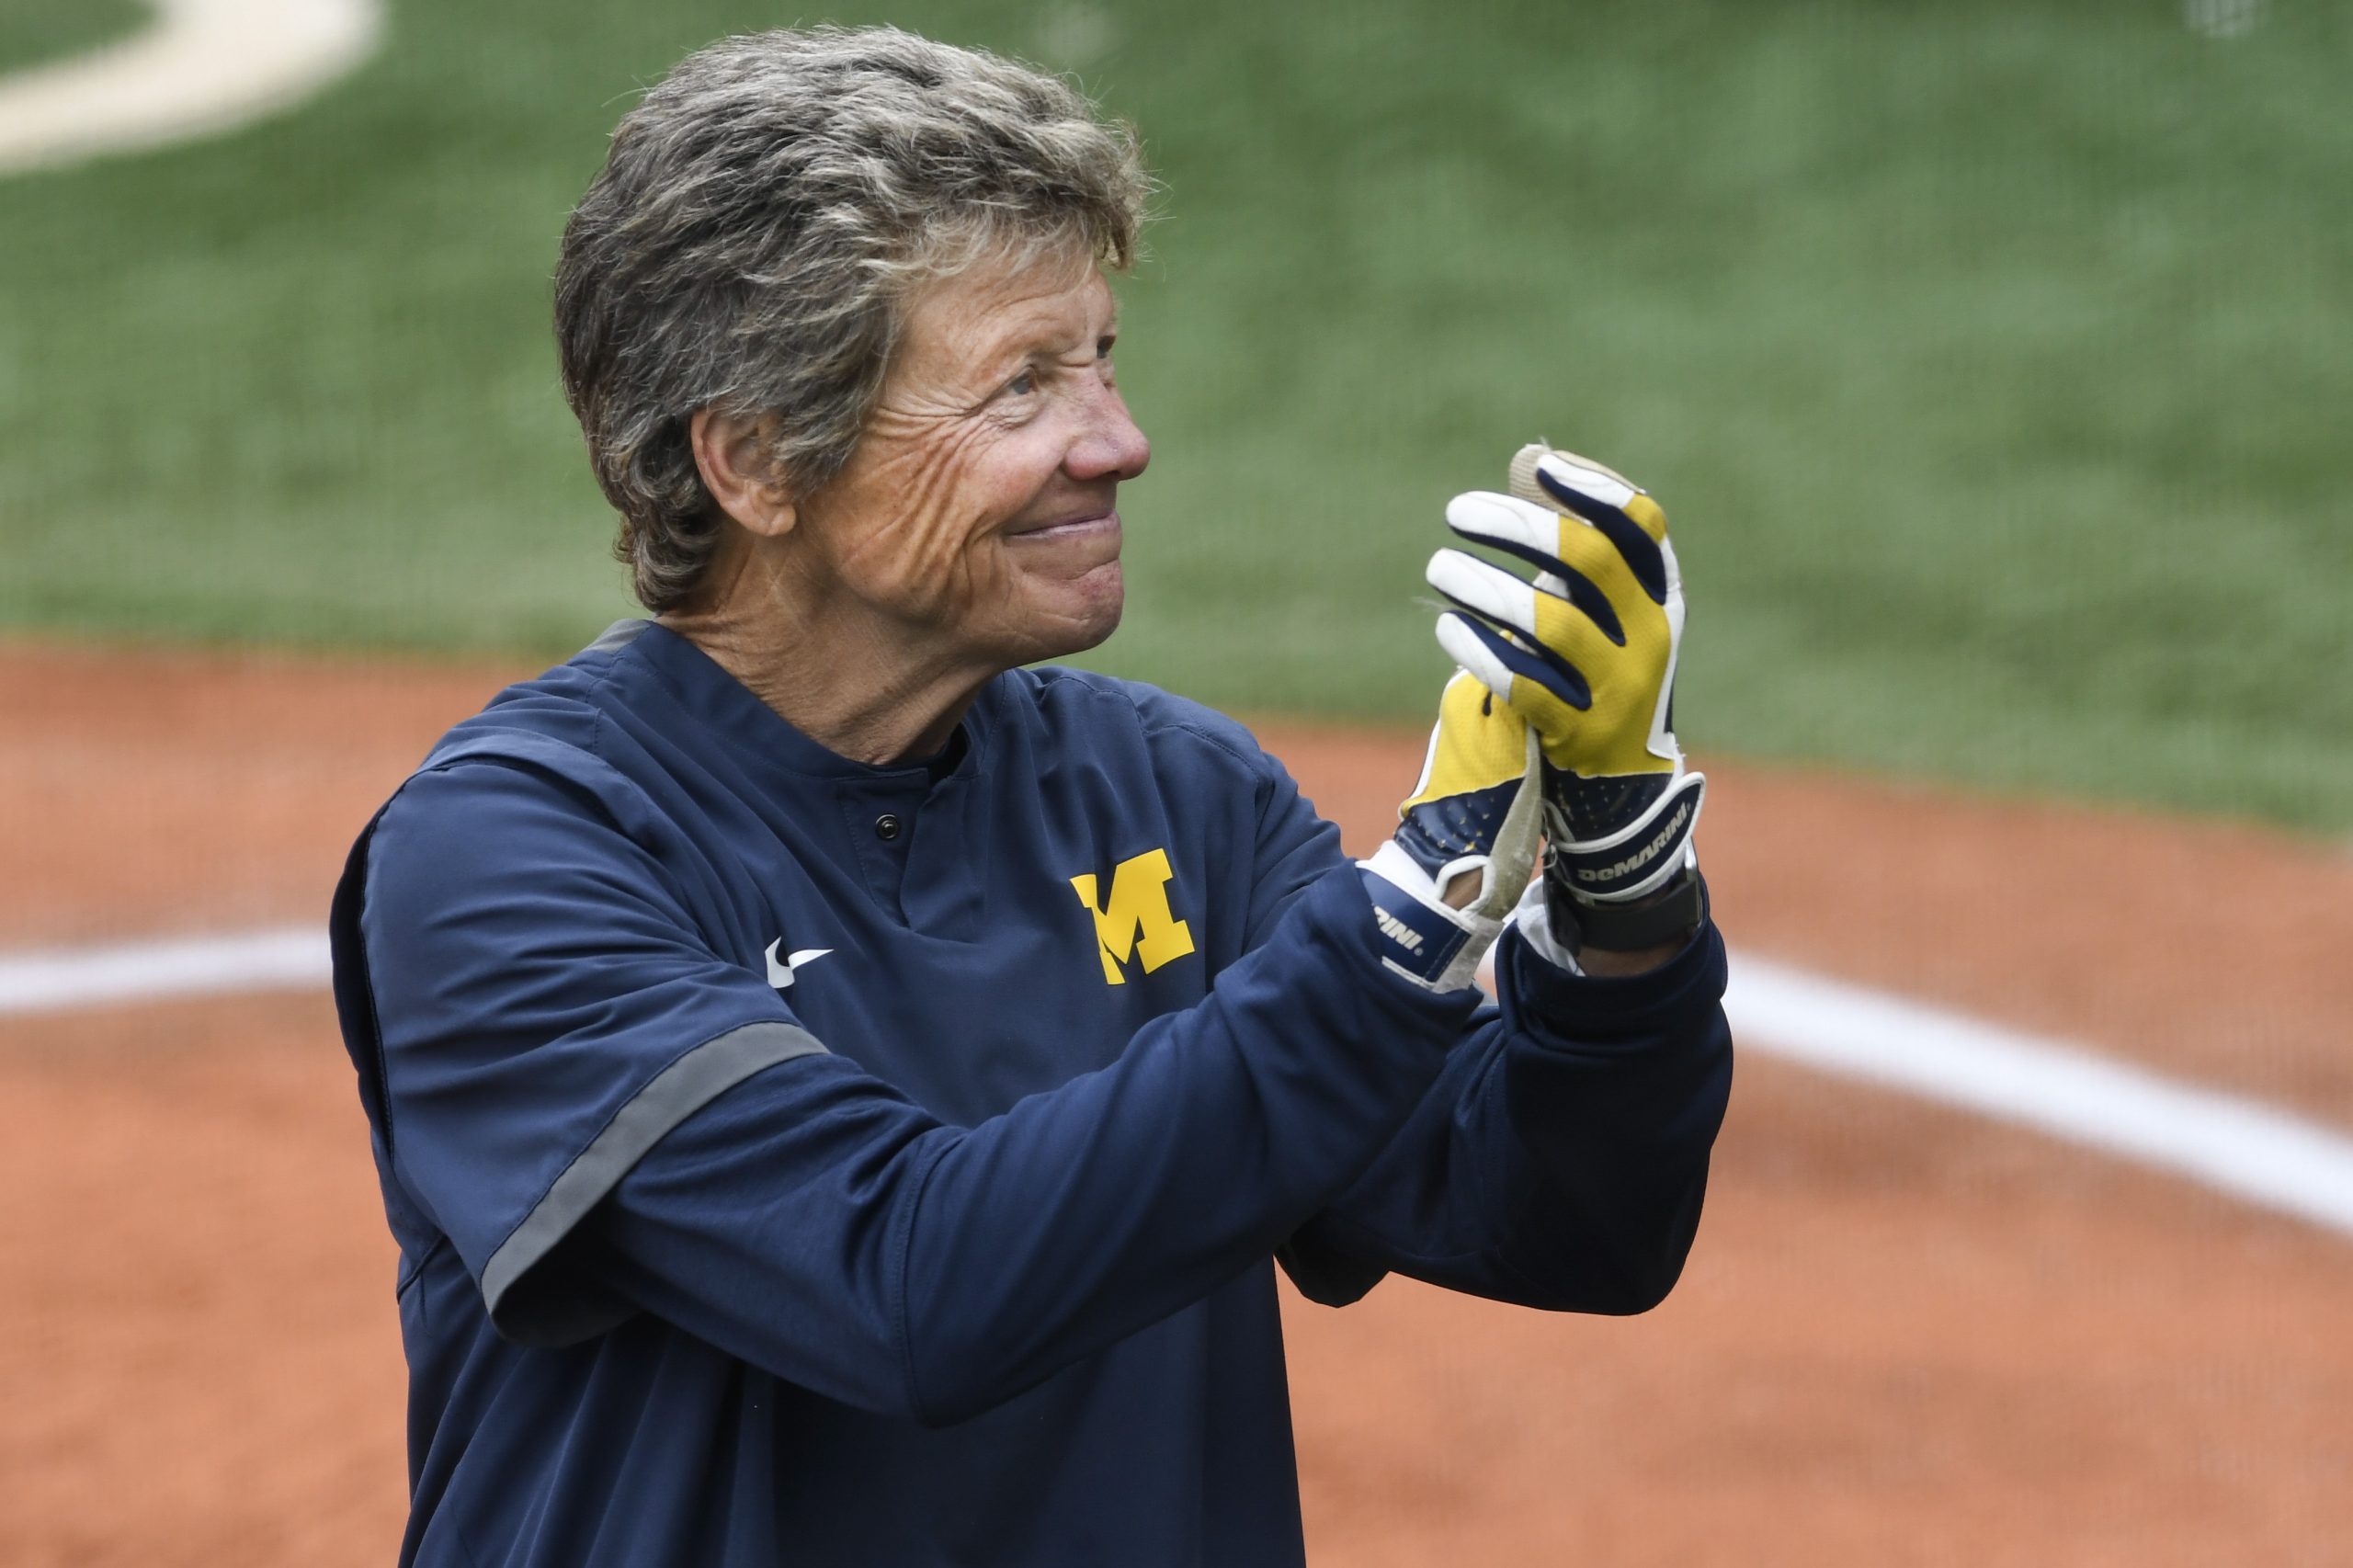 The University of Michigan softball team were defeated by the University of Washington, 2-0, in the NCAA Regional at Husky Softball Stadium in Seattle, Wash., on May 23, 2021.